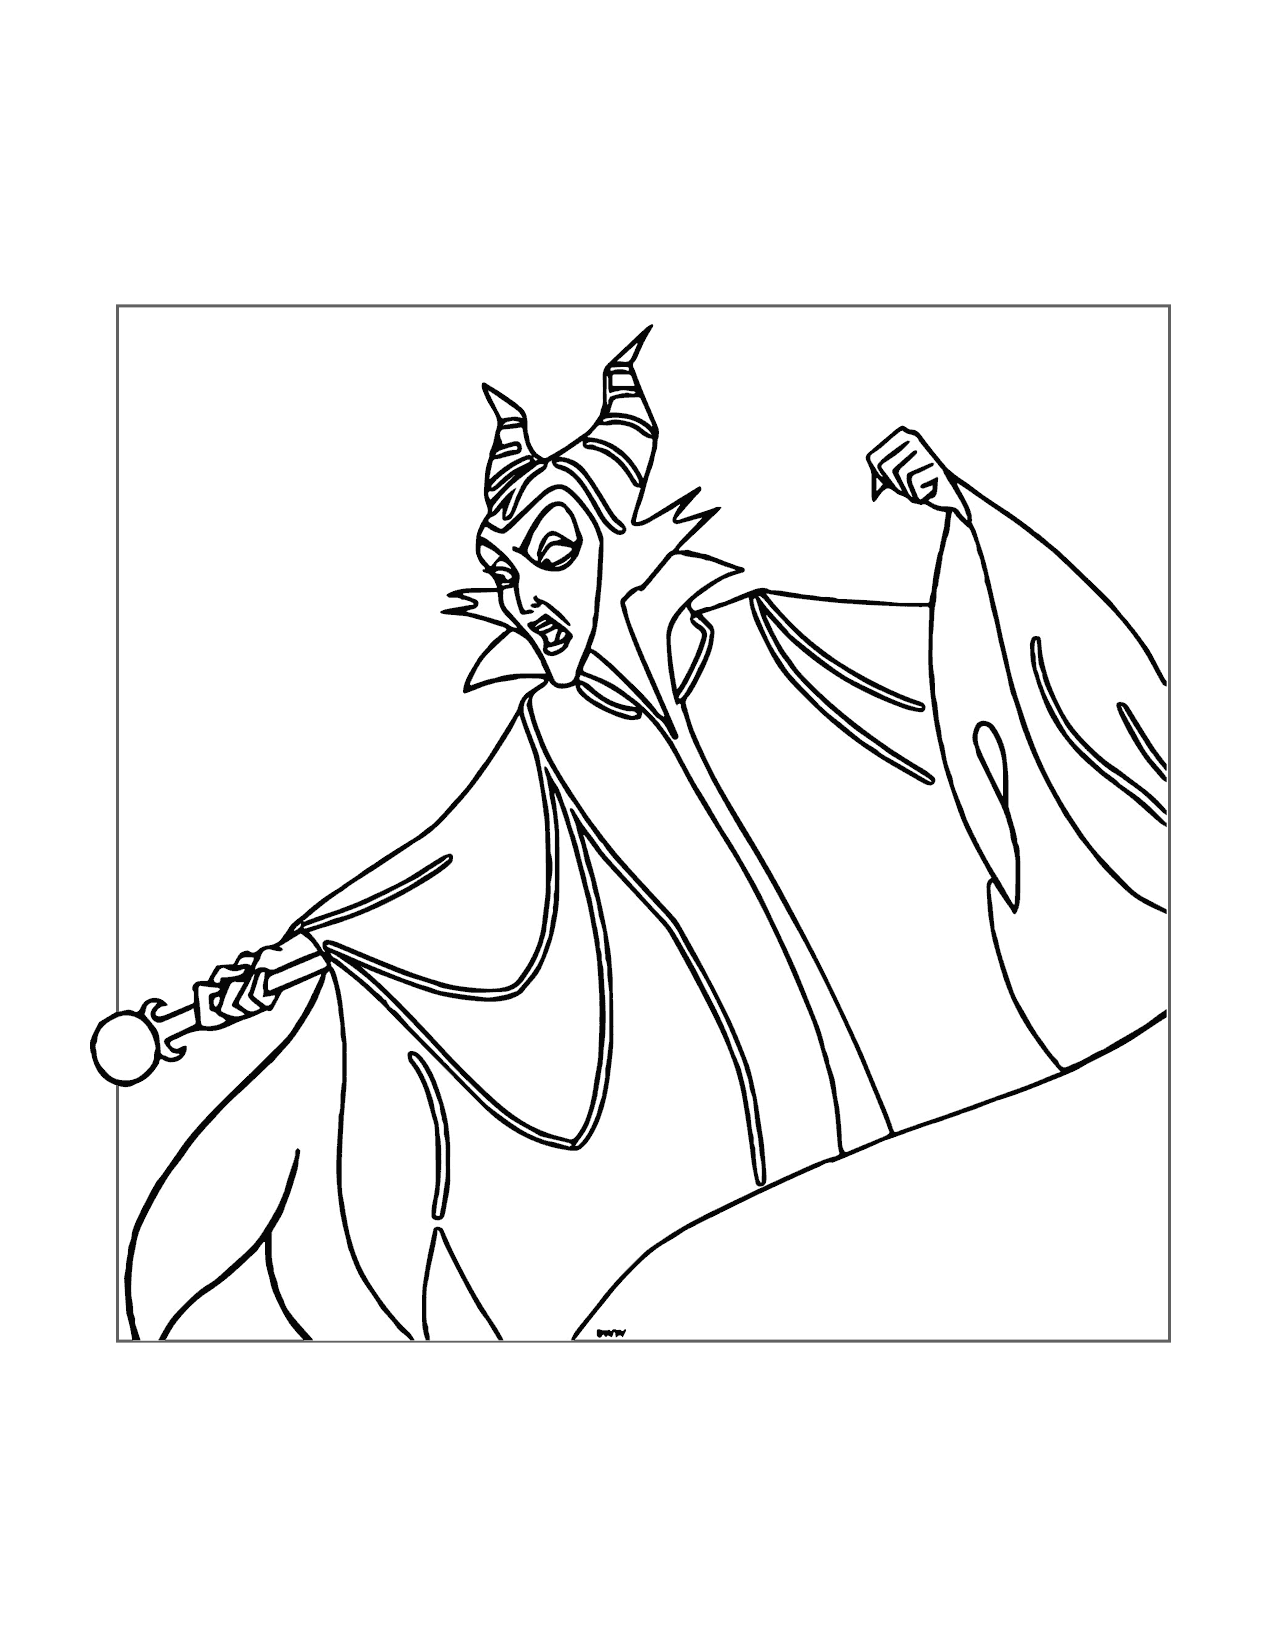 Angry Maleficent Coloring Page